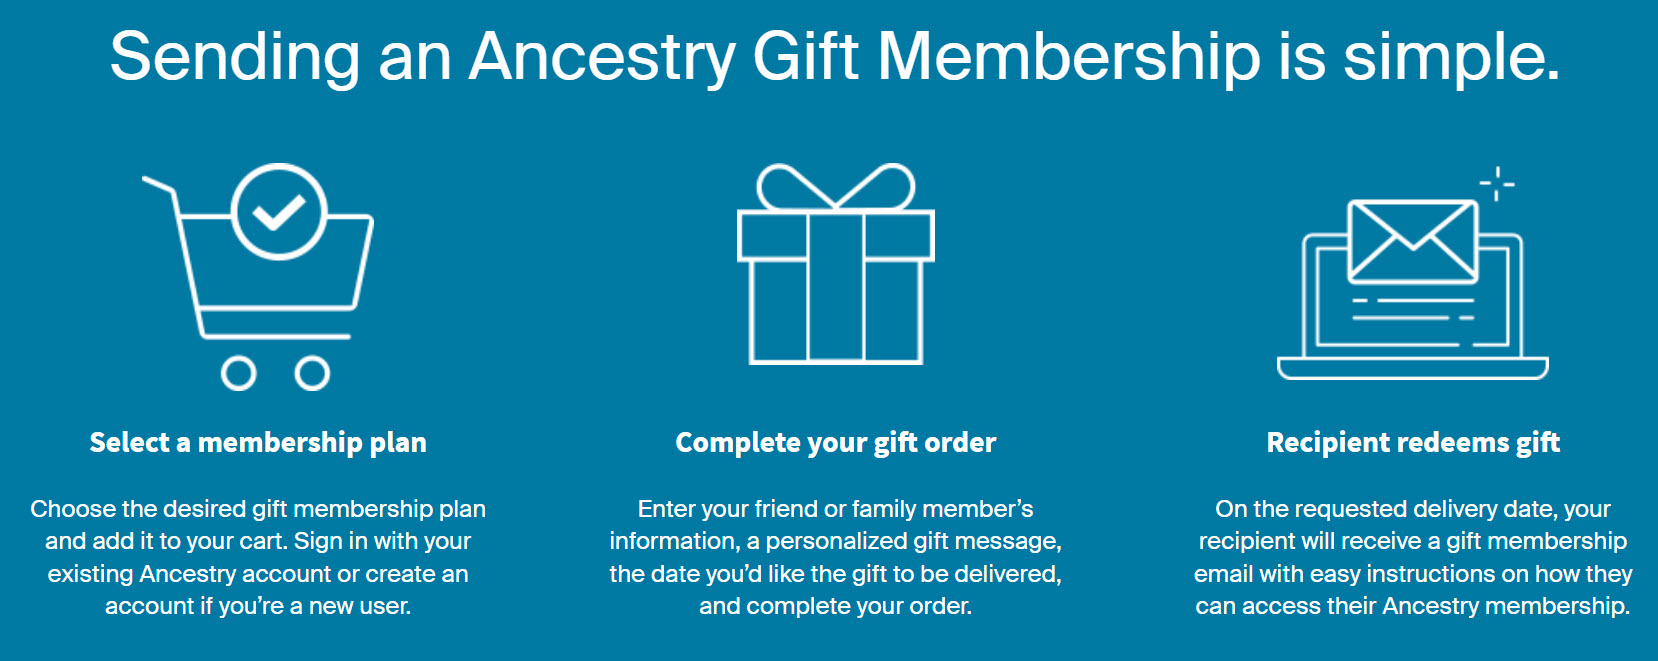 Actually, if you currently have a paid Ancestry subscriptions OR if you just have a free account, there are ways you can get an Ancestry Gift Membership for yourself!